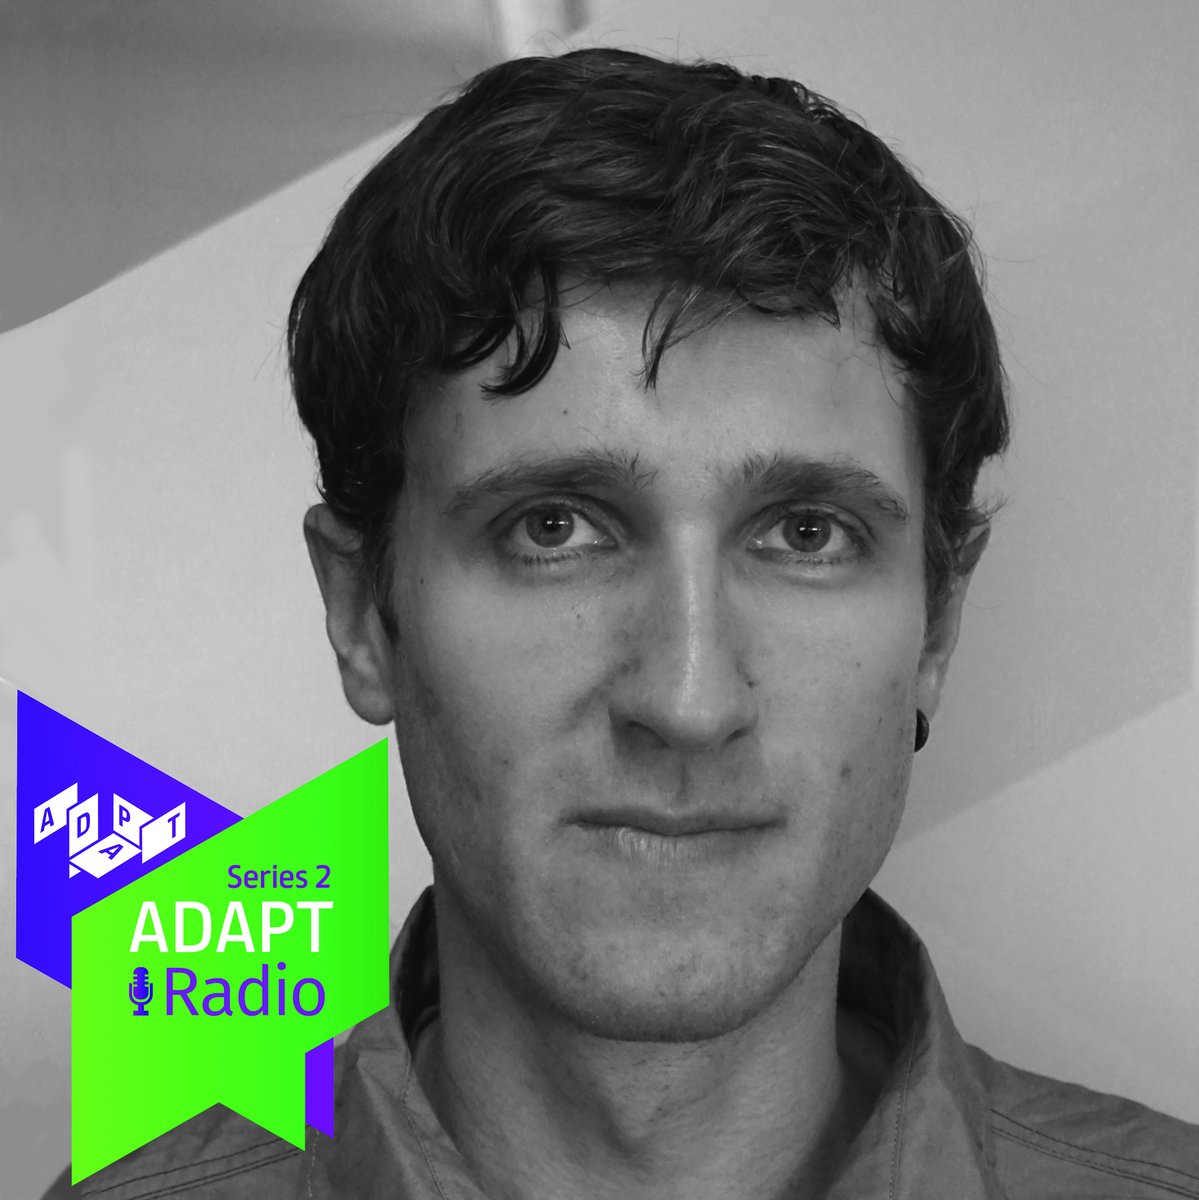 Last week's #ADAPTRadio episode featured Vladimir Krylov of @ai_mapit who explains the value of #AI tech in automating mapping of street assets, to save time and improve accuracy. adaptcentre.ie/news/vladimir-… @scienceirel @RDahyot @moataz_ahmd @donalscannell